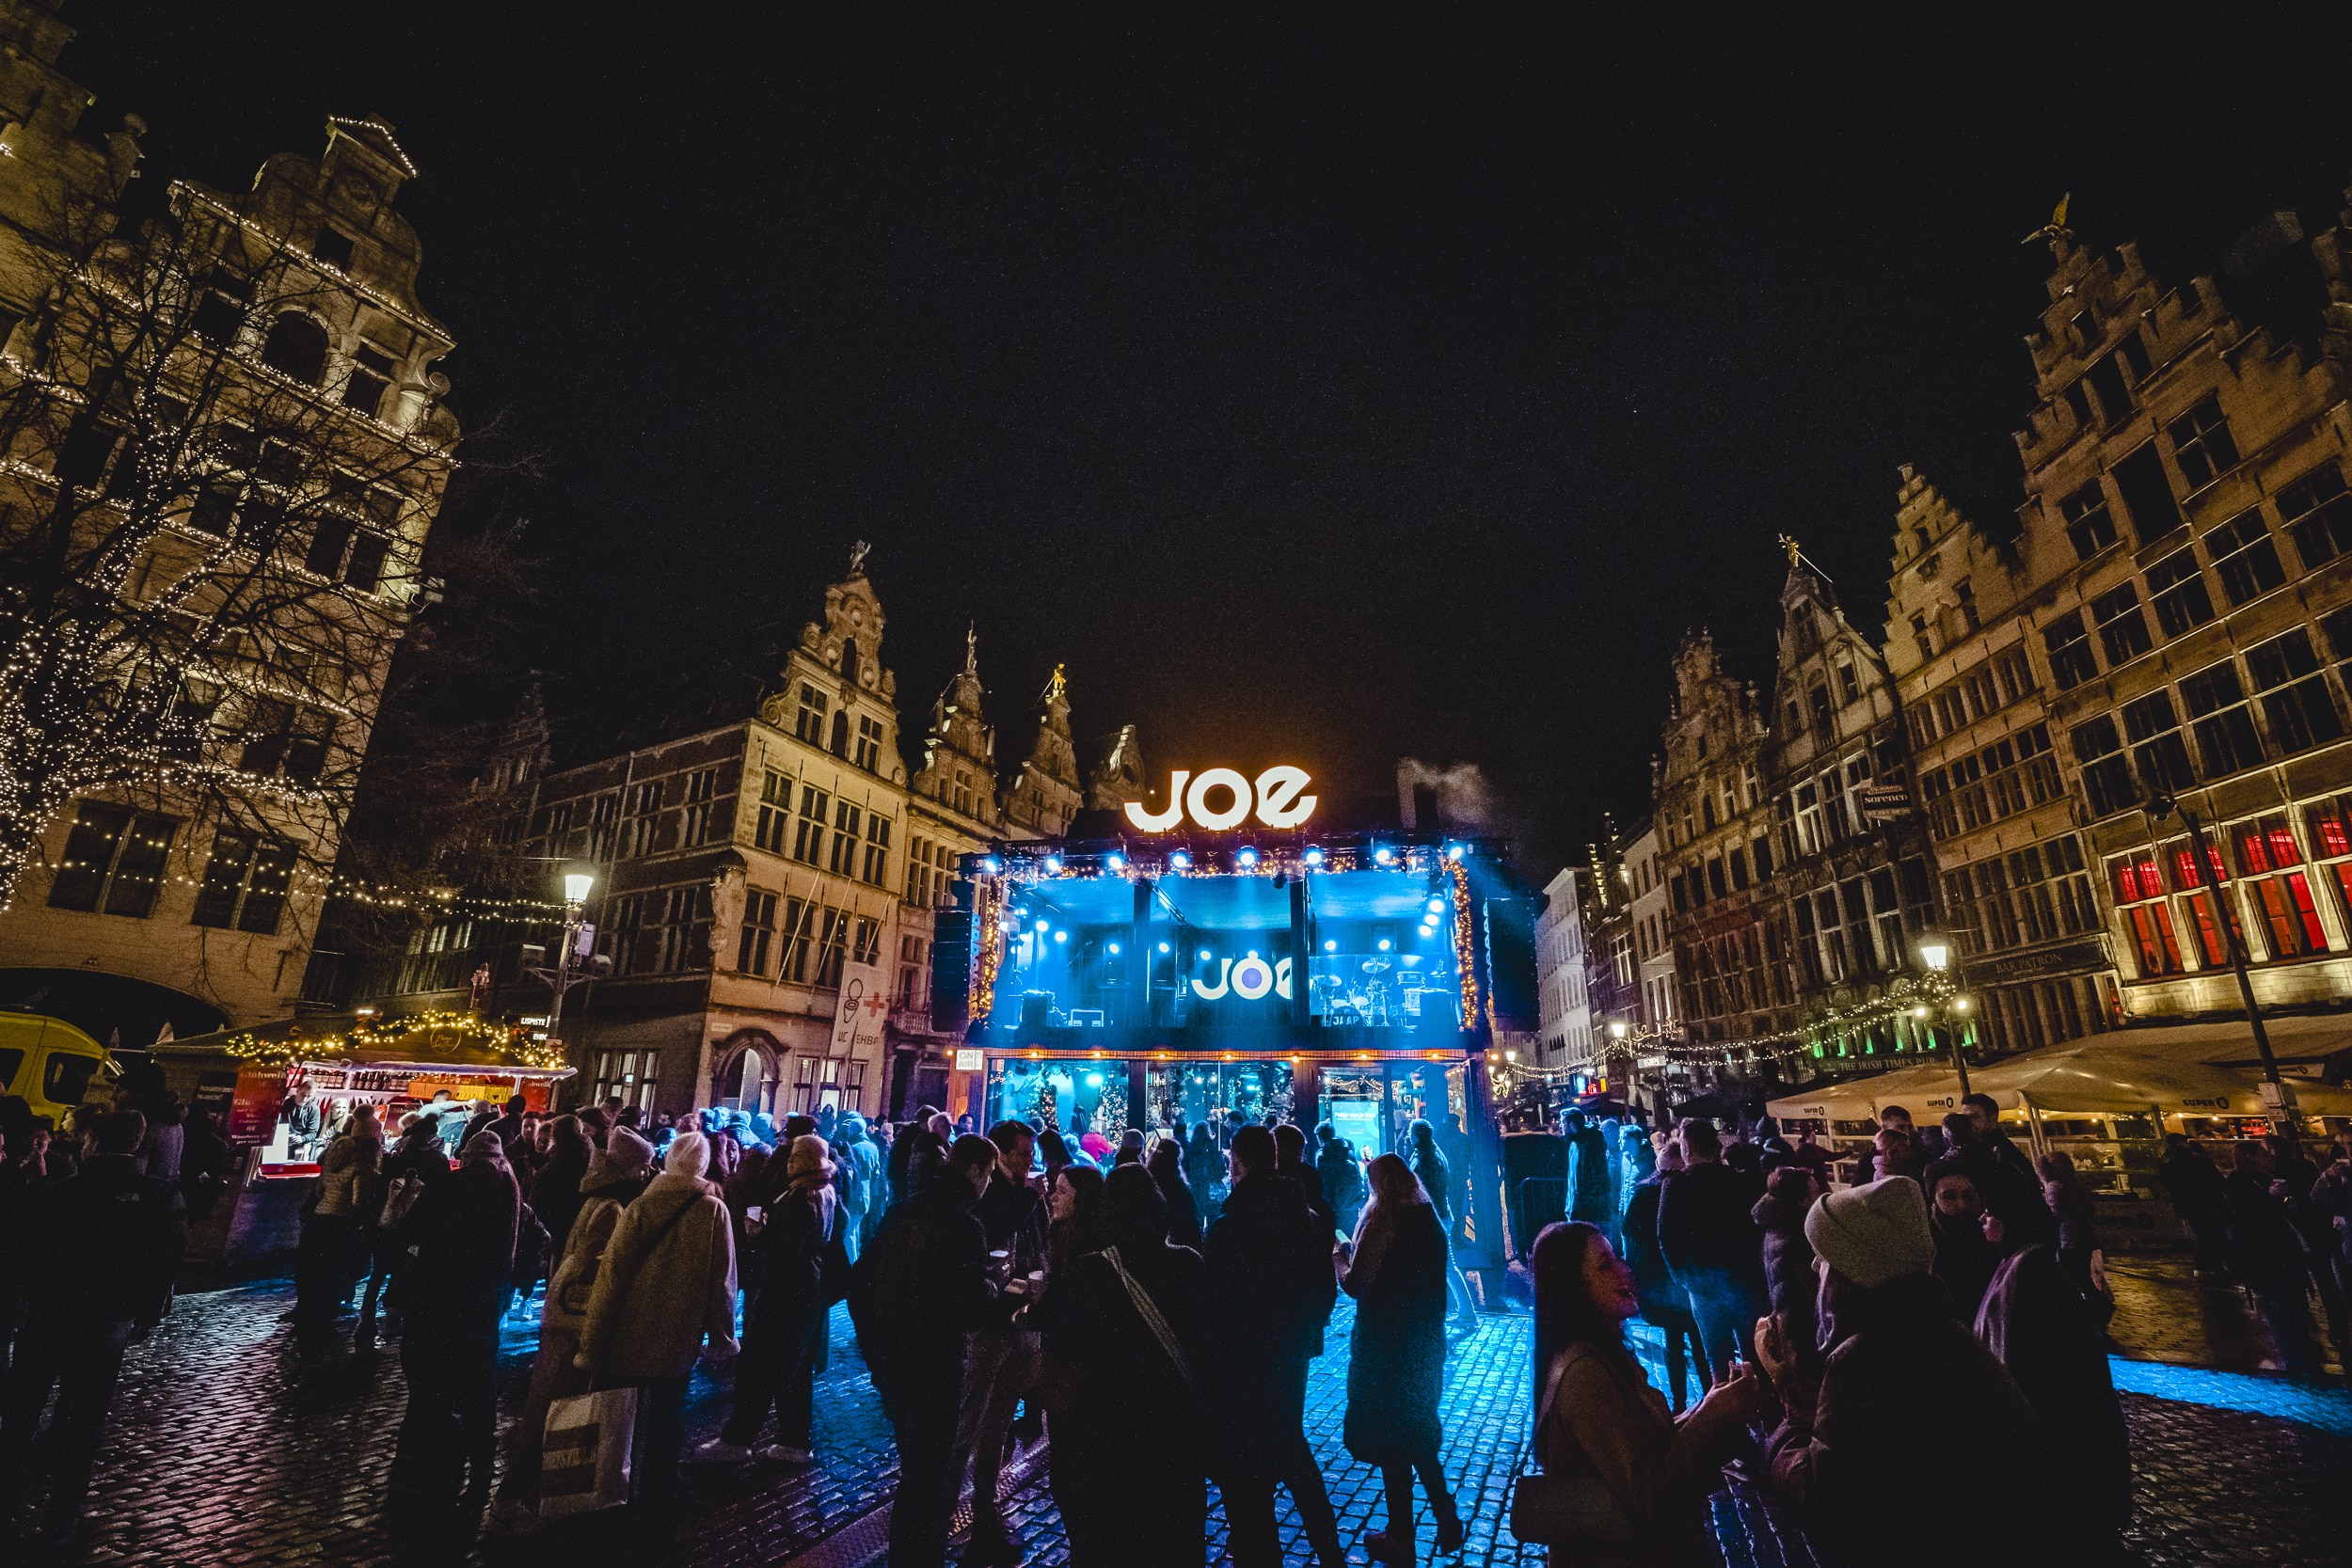 The JOE Christmas House in Antwerp's Grote Markt, the city's main square